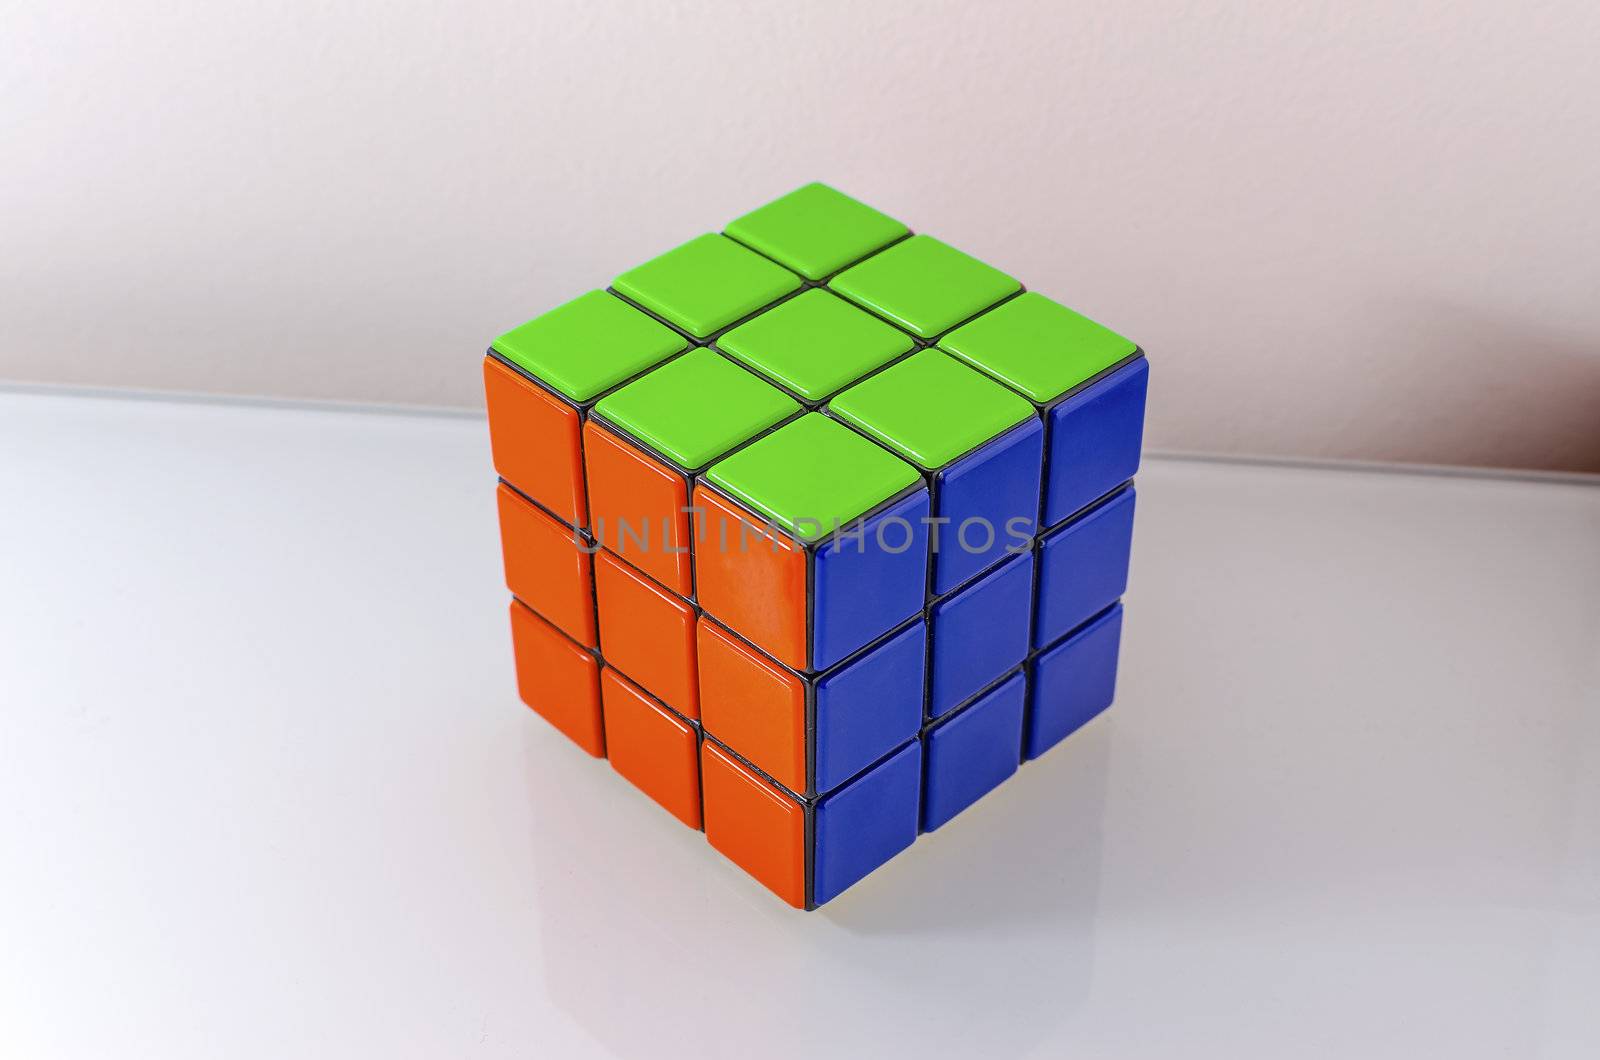 Successfully Solved Rubiks Cube by marcorubino